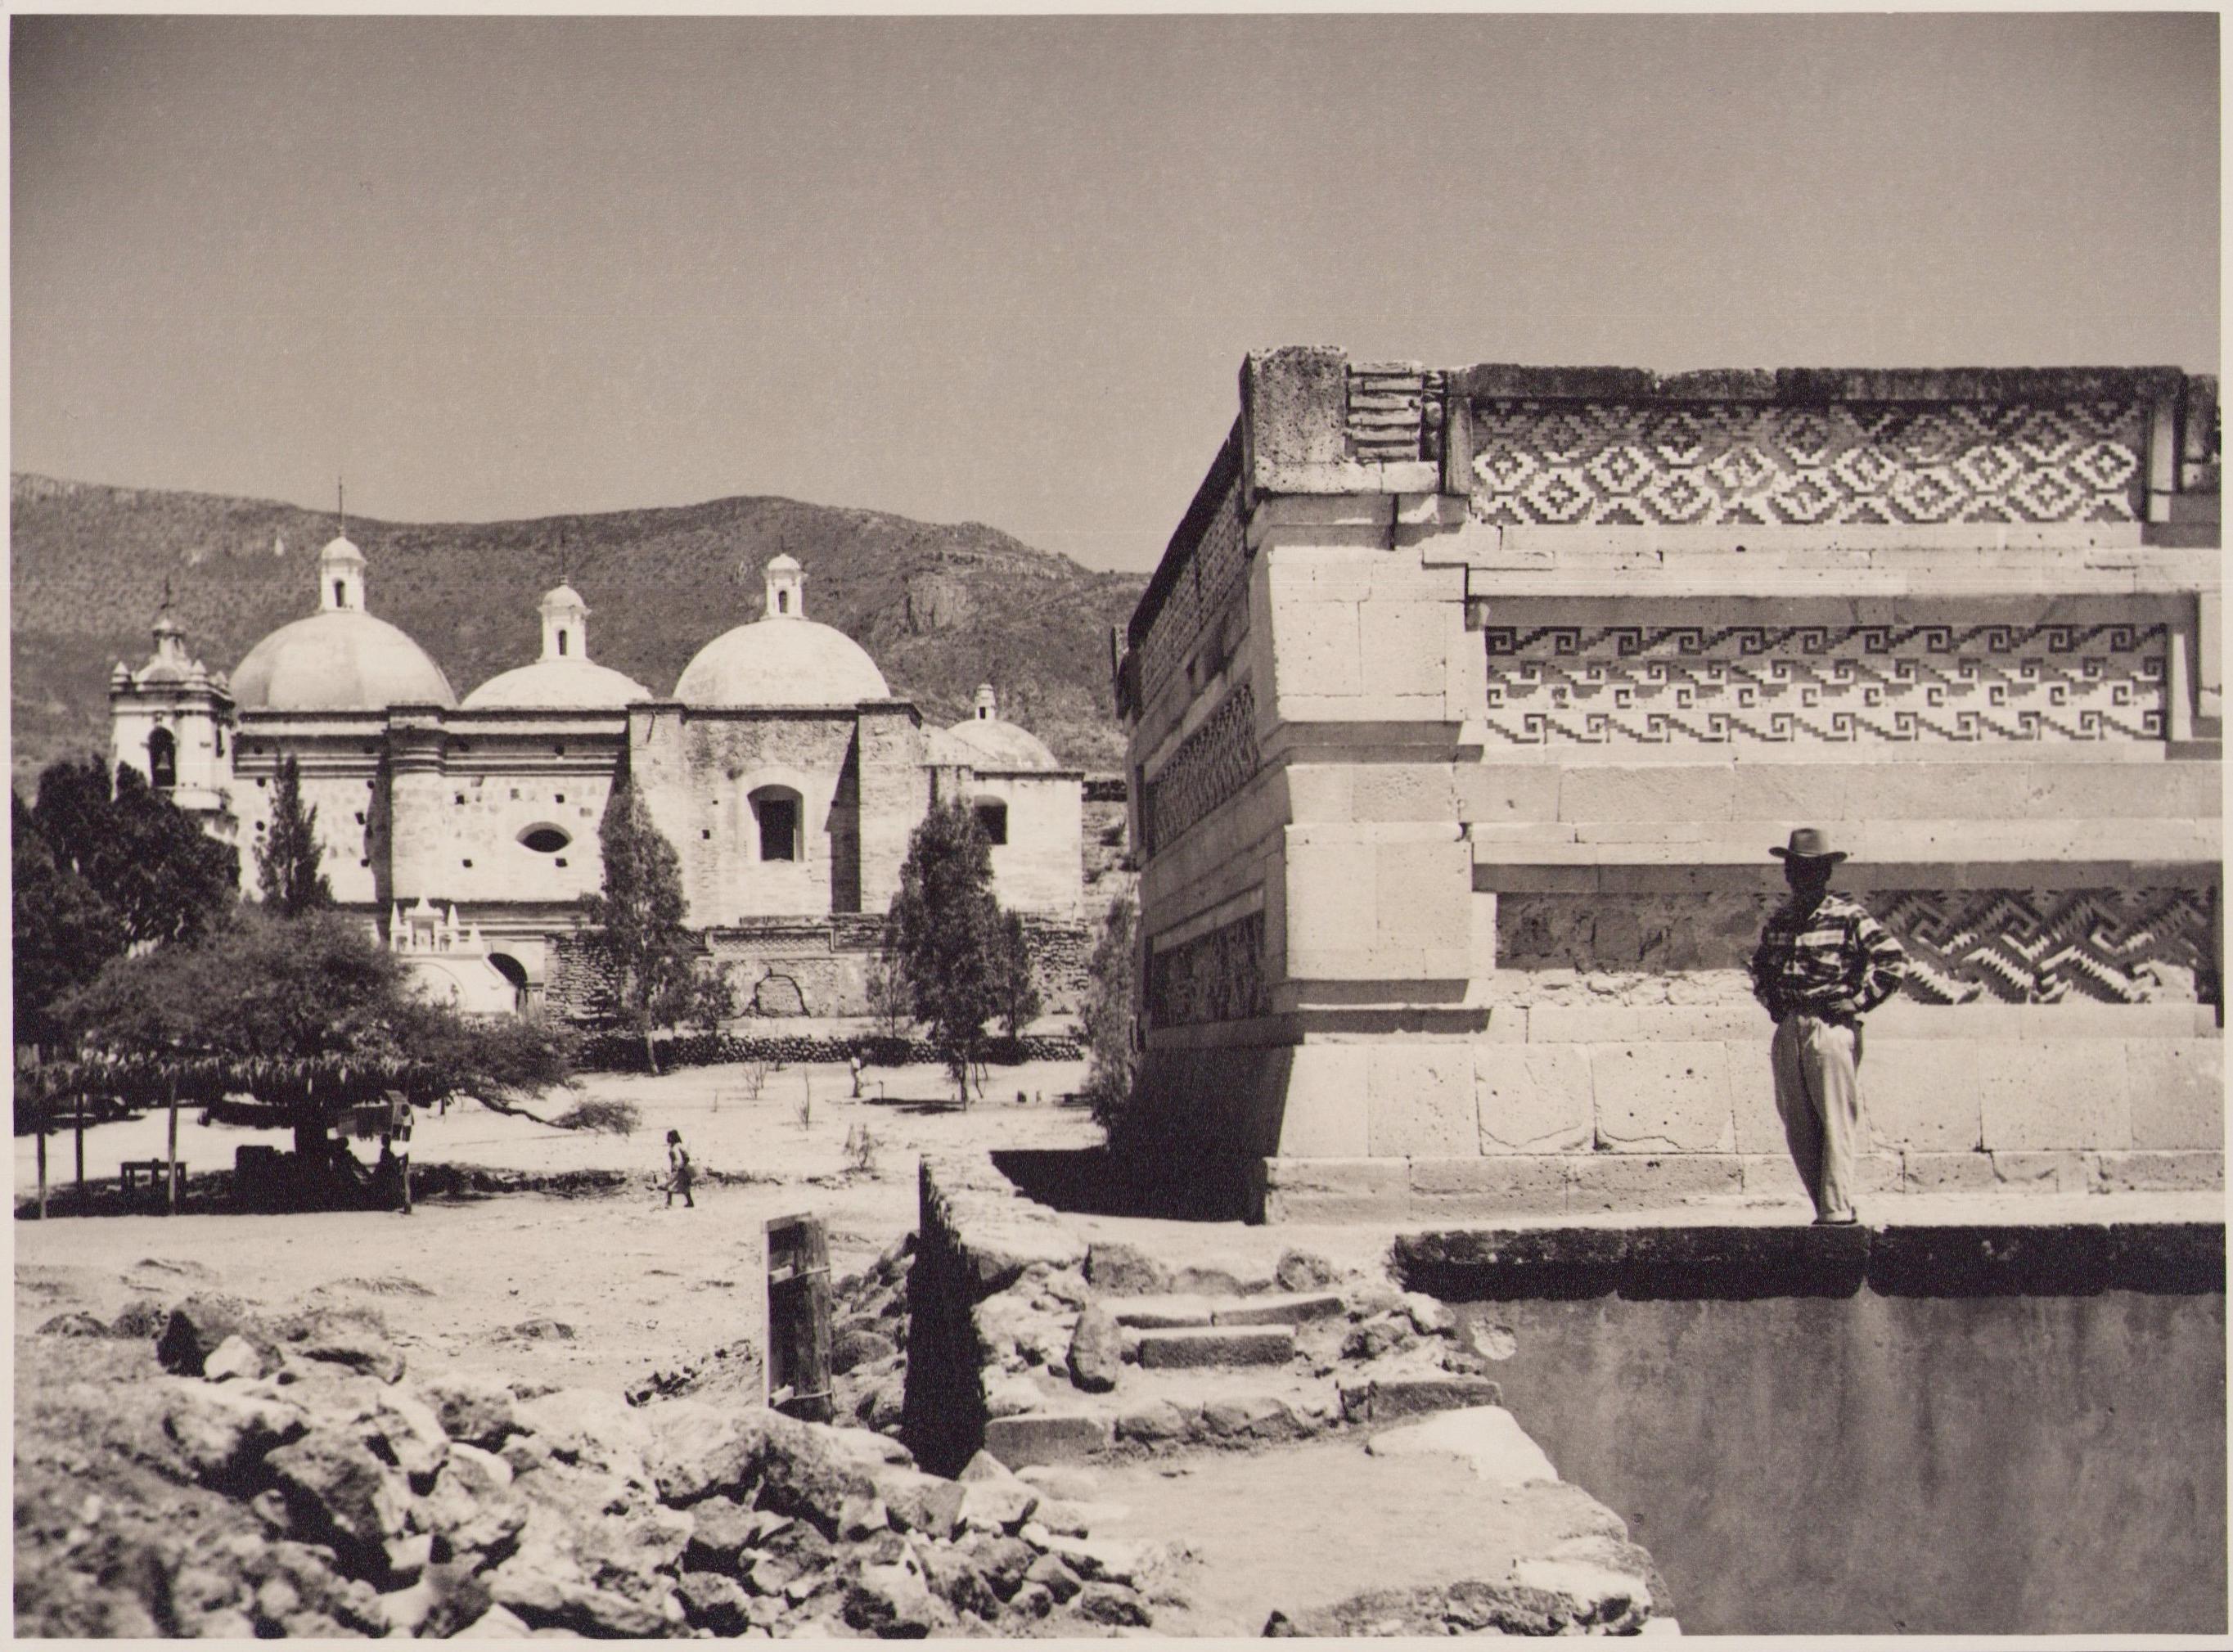 Mexico, Ruins, Mitla, Black and White Photography, 1960s, 17, 1 x 23, 2 cm